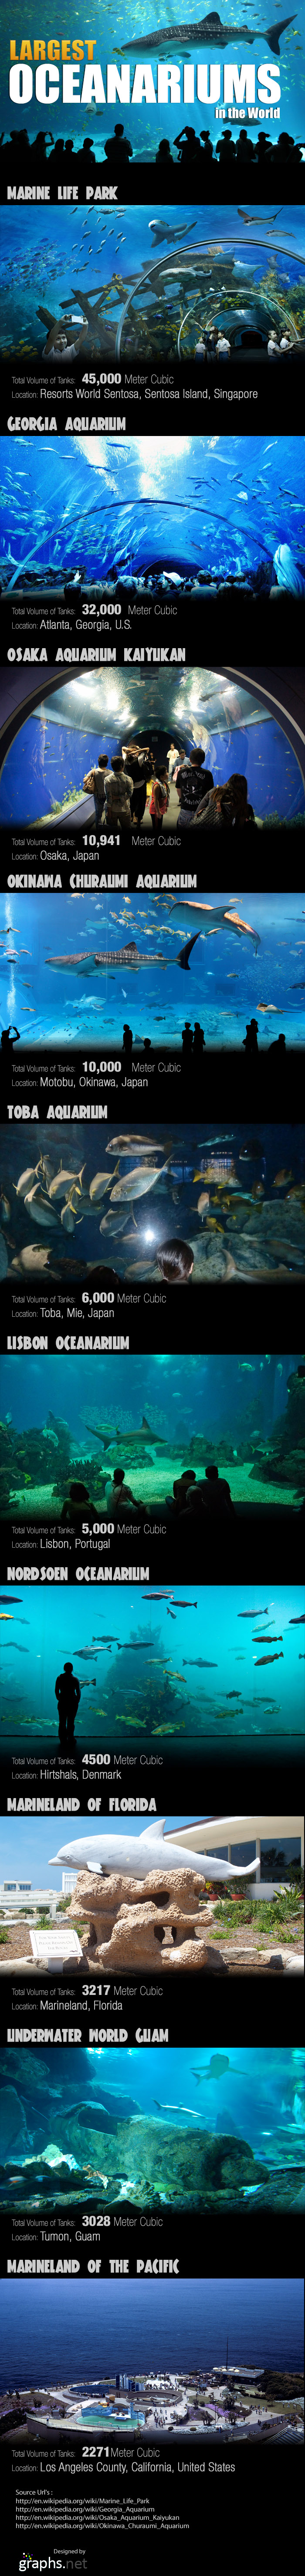 Infographic - Largest-Oceanariums-in-the-world